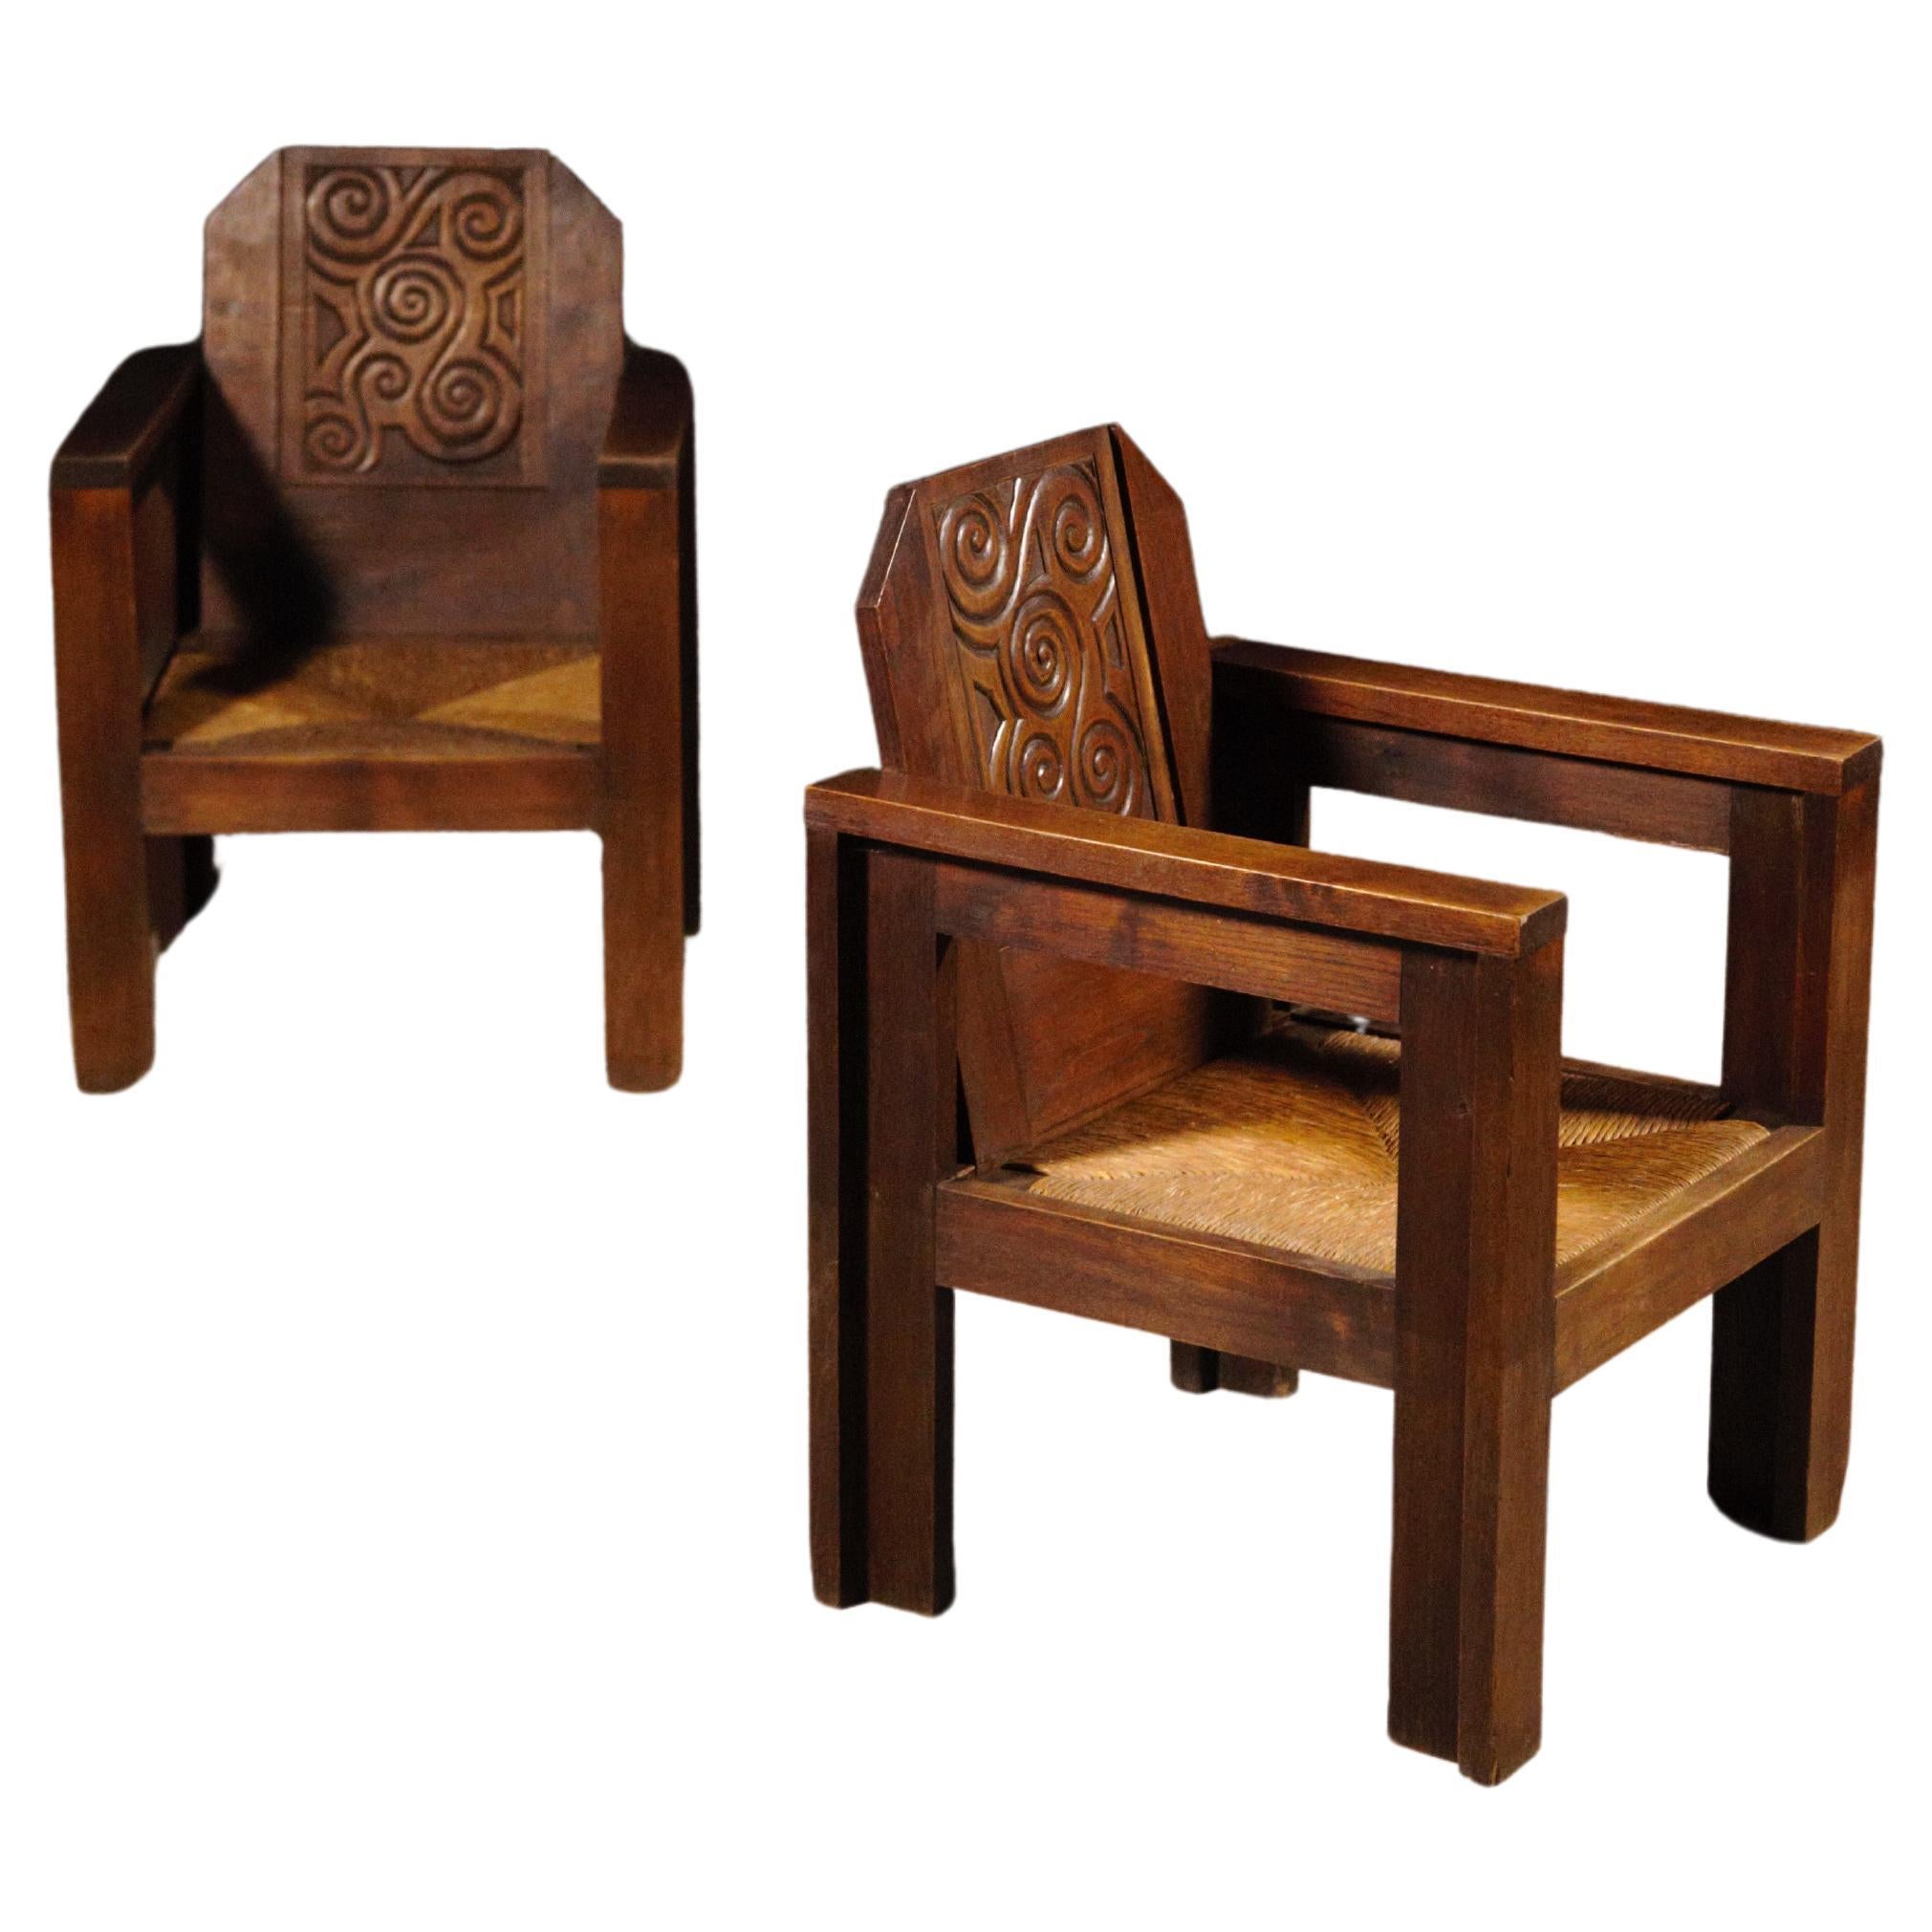 A Rare Pair of Celtic Armchairs by Joseph Savina France 1930s For Sale